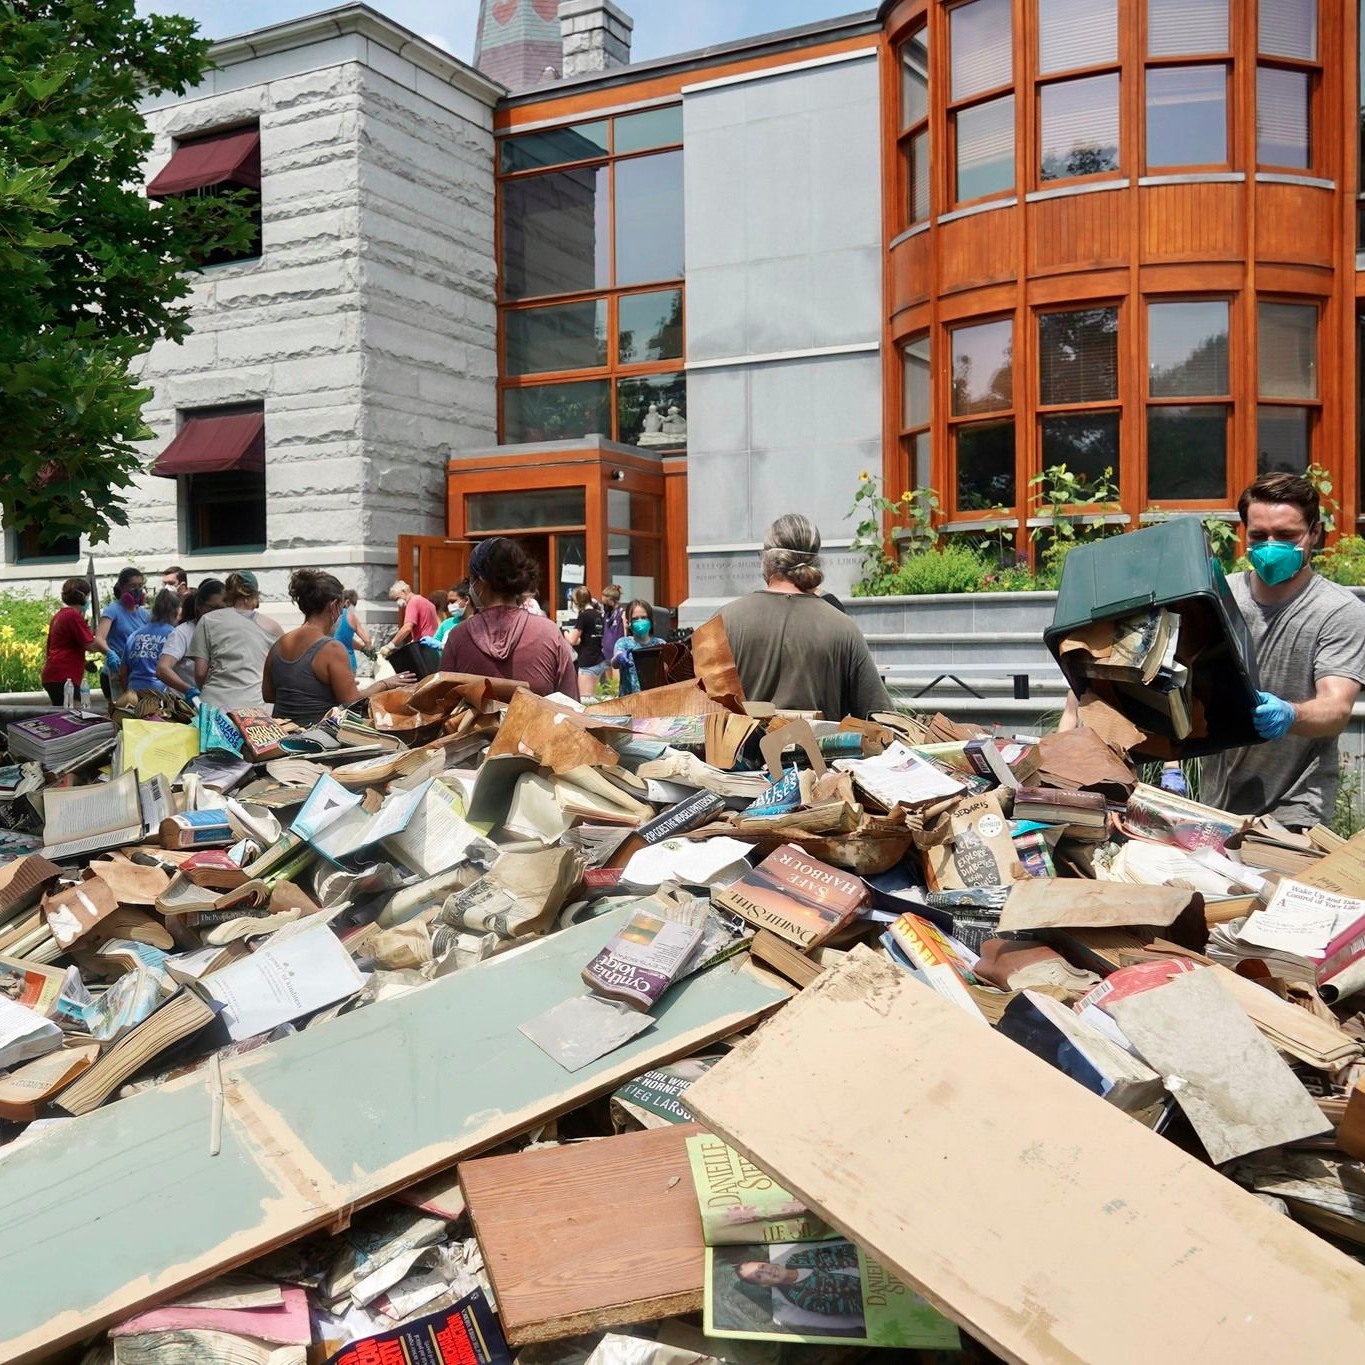 Pile of destroyed books and debris outside of School Street entrance of library.